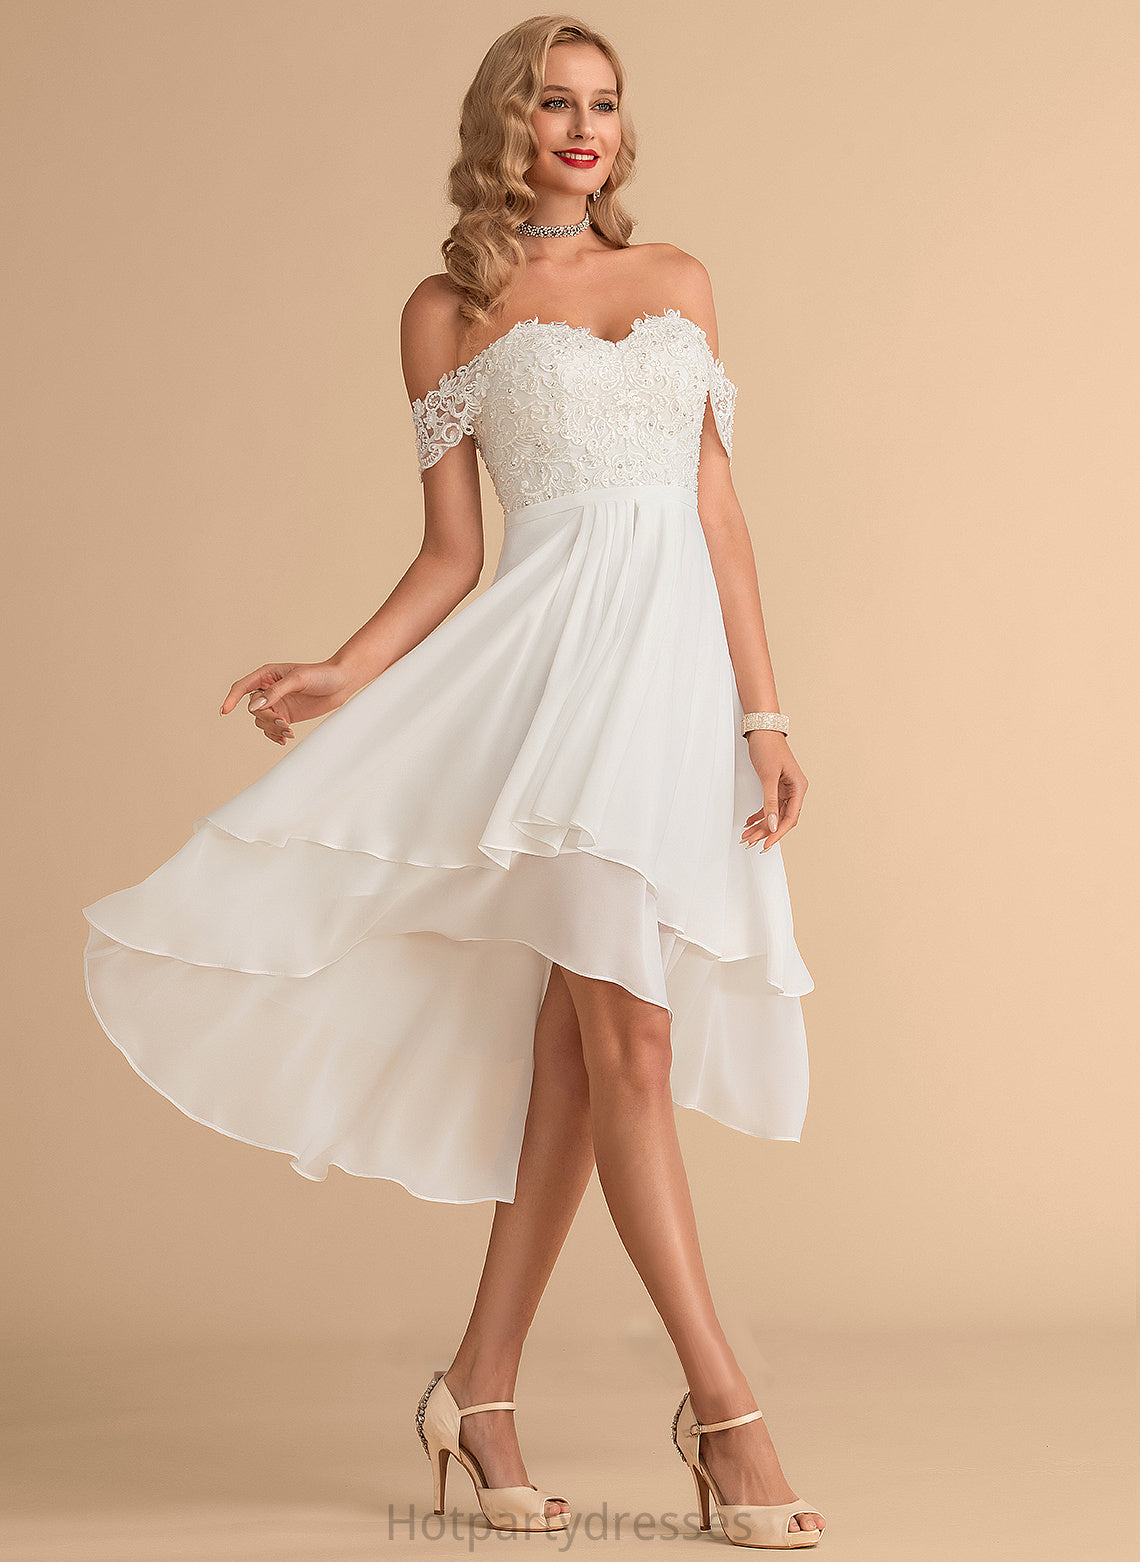 Dress Neveah Wedding Sequins Chiffon Beading With Wedding Dresses Asymmetrical Lace A-Line